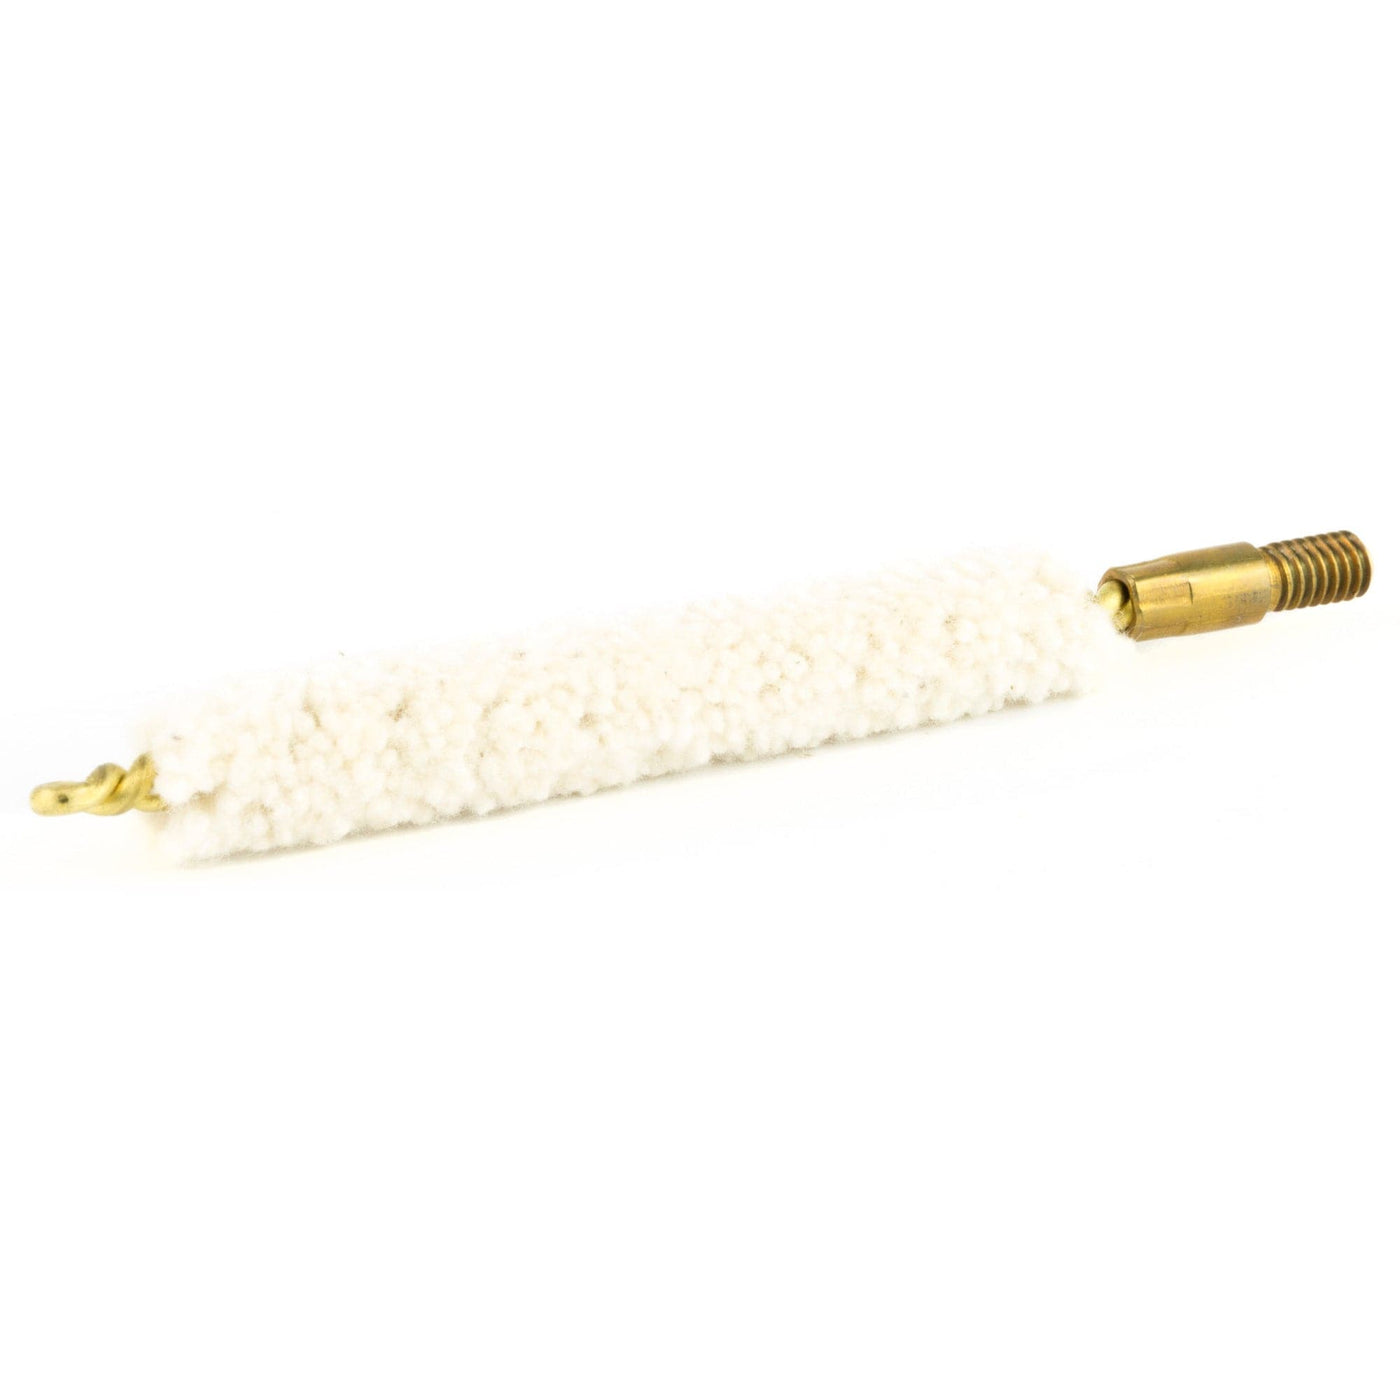 Pro-Shot Products Pro-shot Mop .24-.27cal Cleaning Equipment